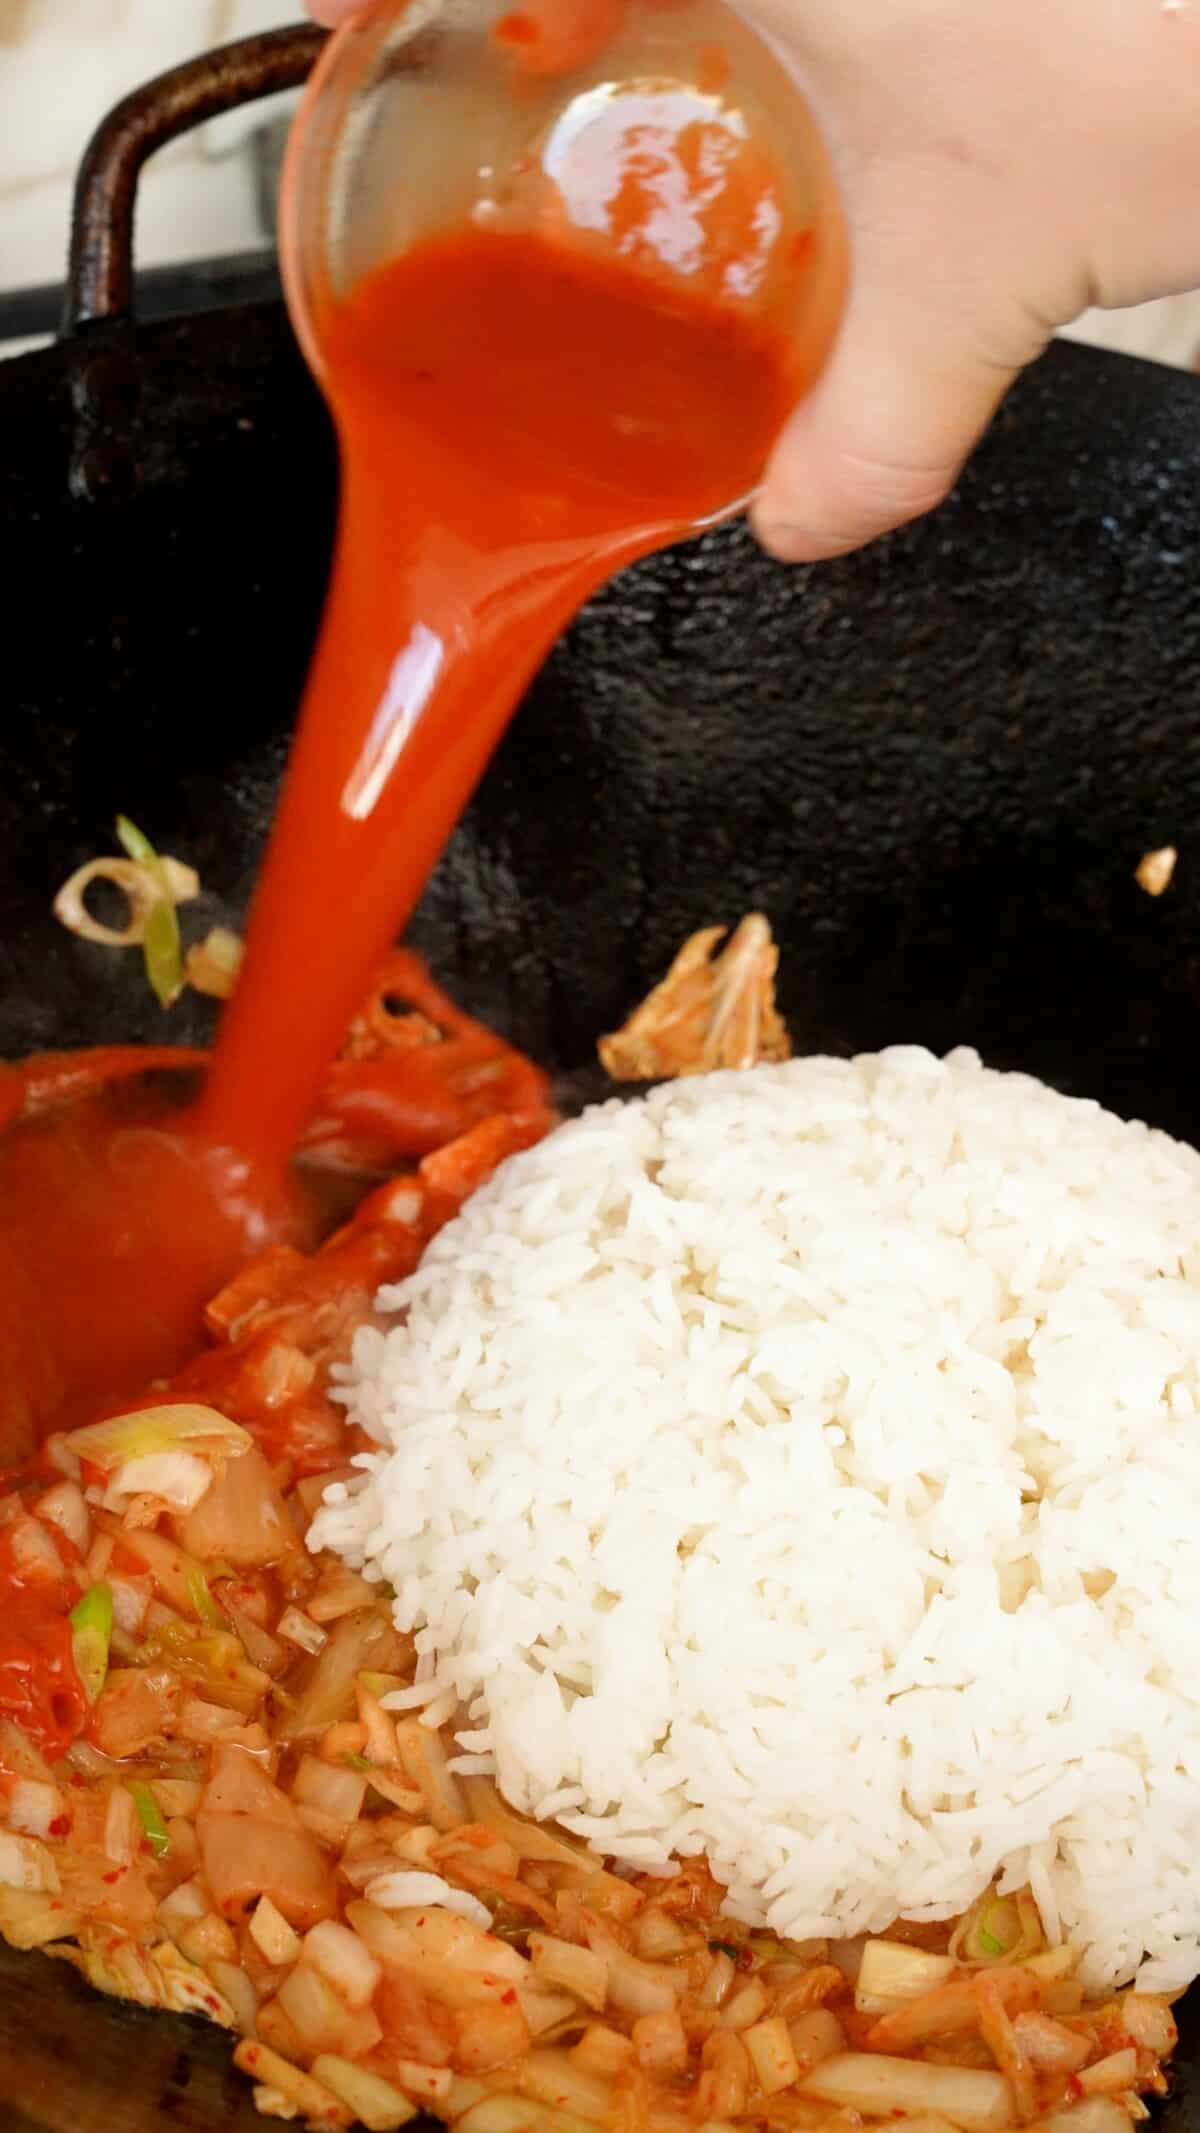 Kimchi Fried Rice sauce being poured in a wok with rice and sauteed vegetables.